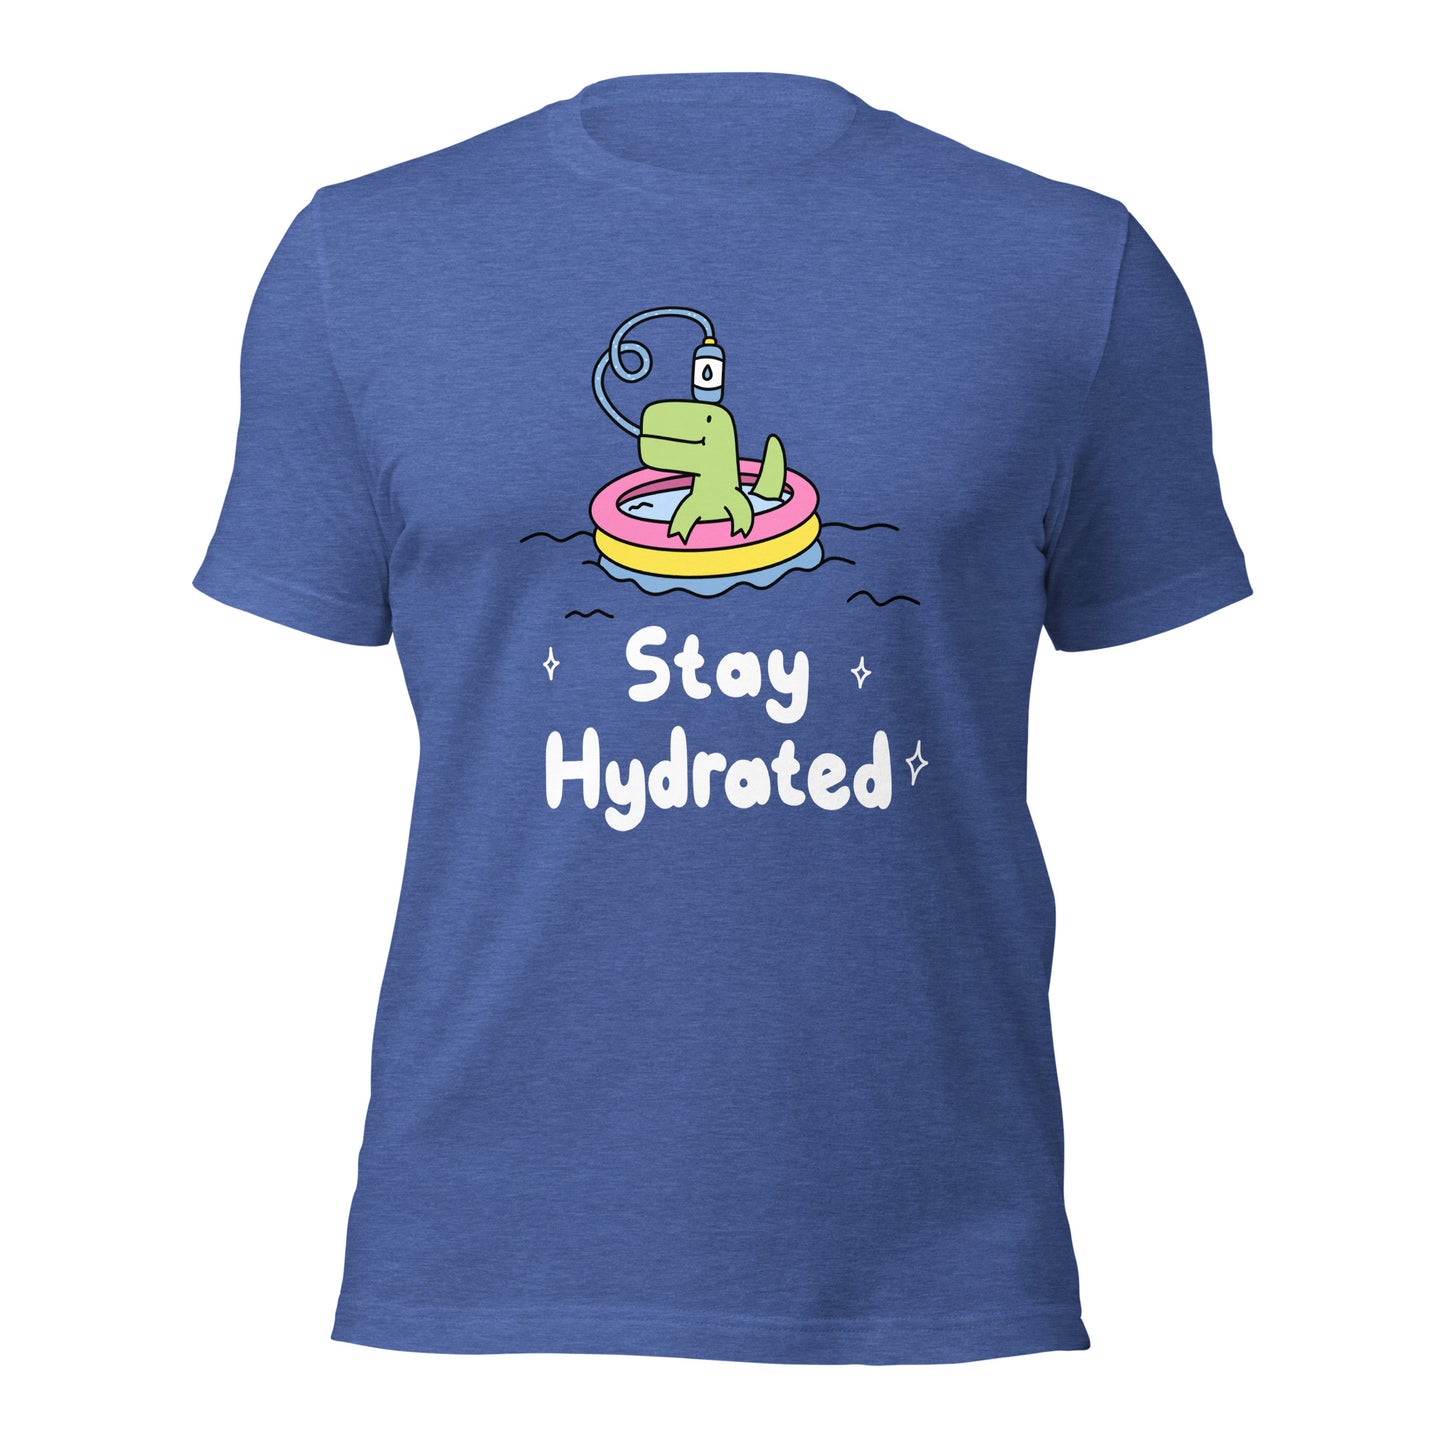 Stay Hydrated Unisex T-Shirt